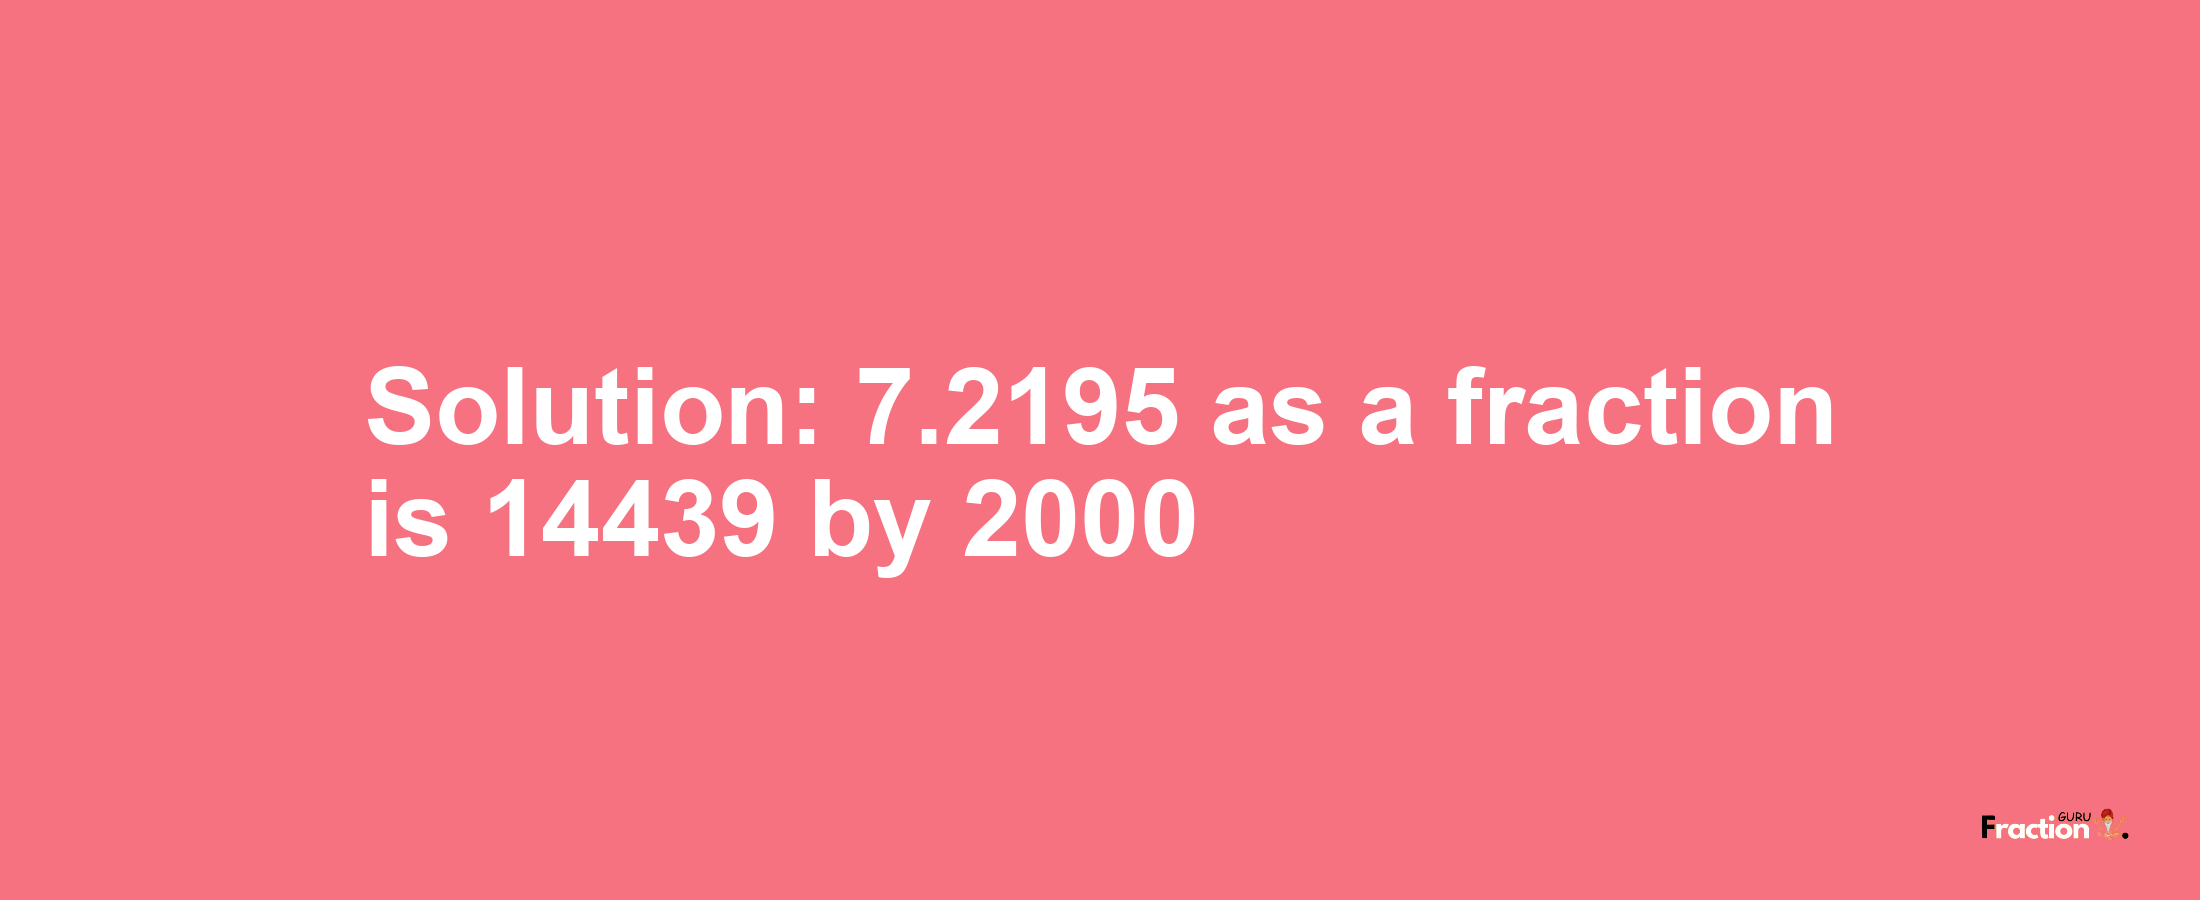 Solution:7.2195 as a fraction is 14439/2000